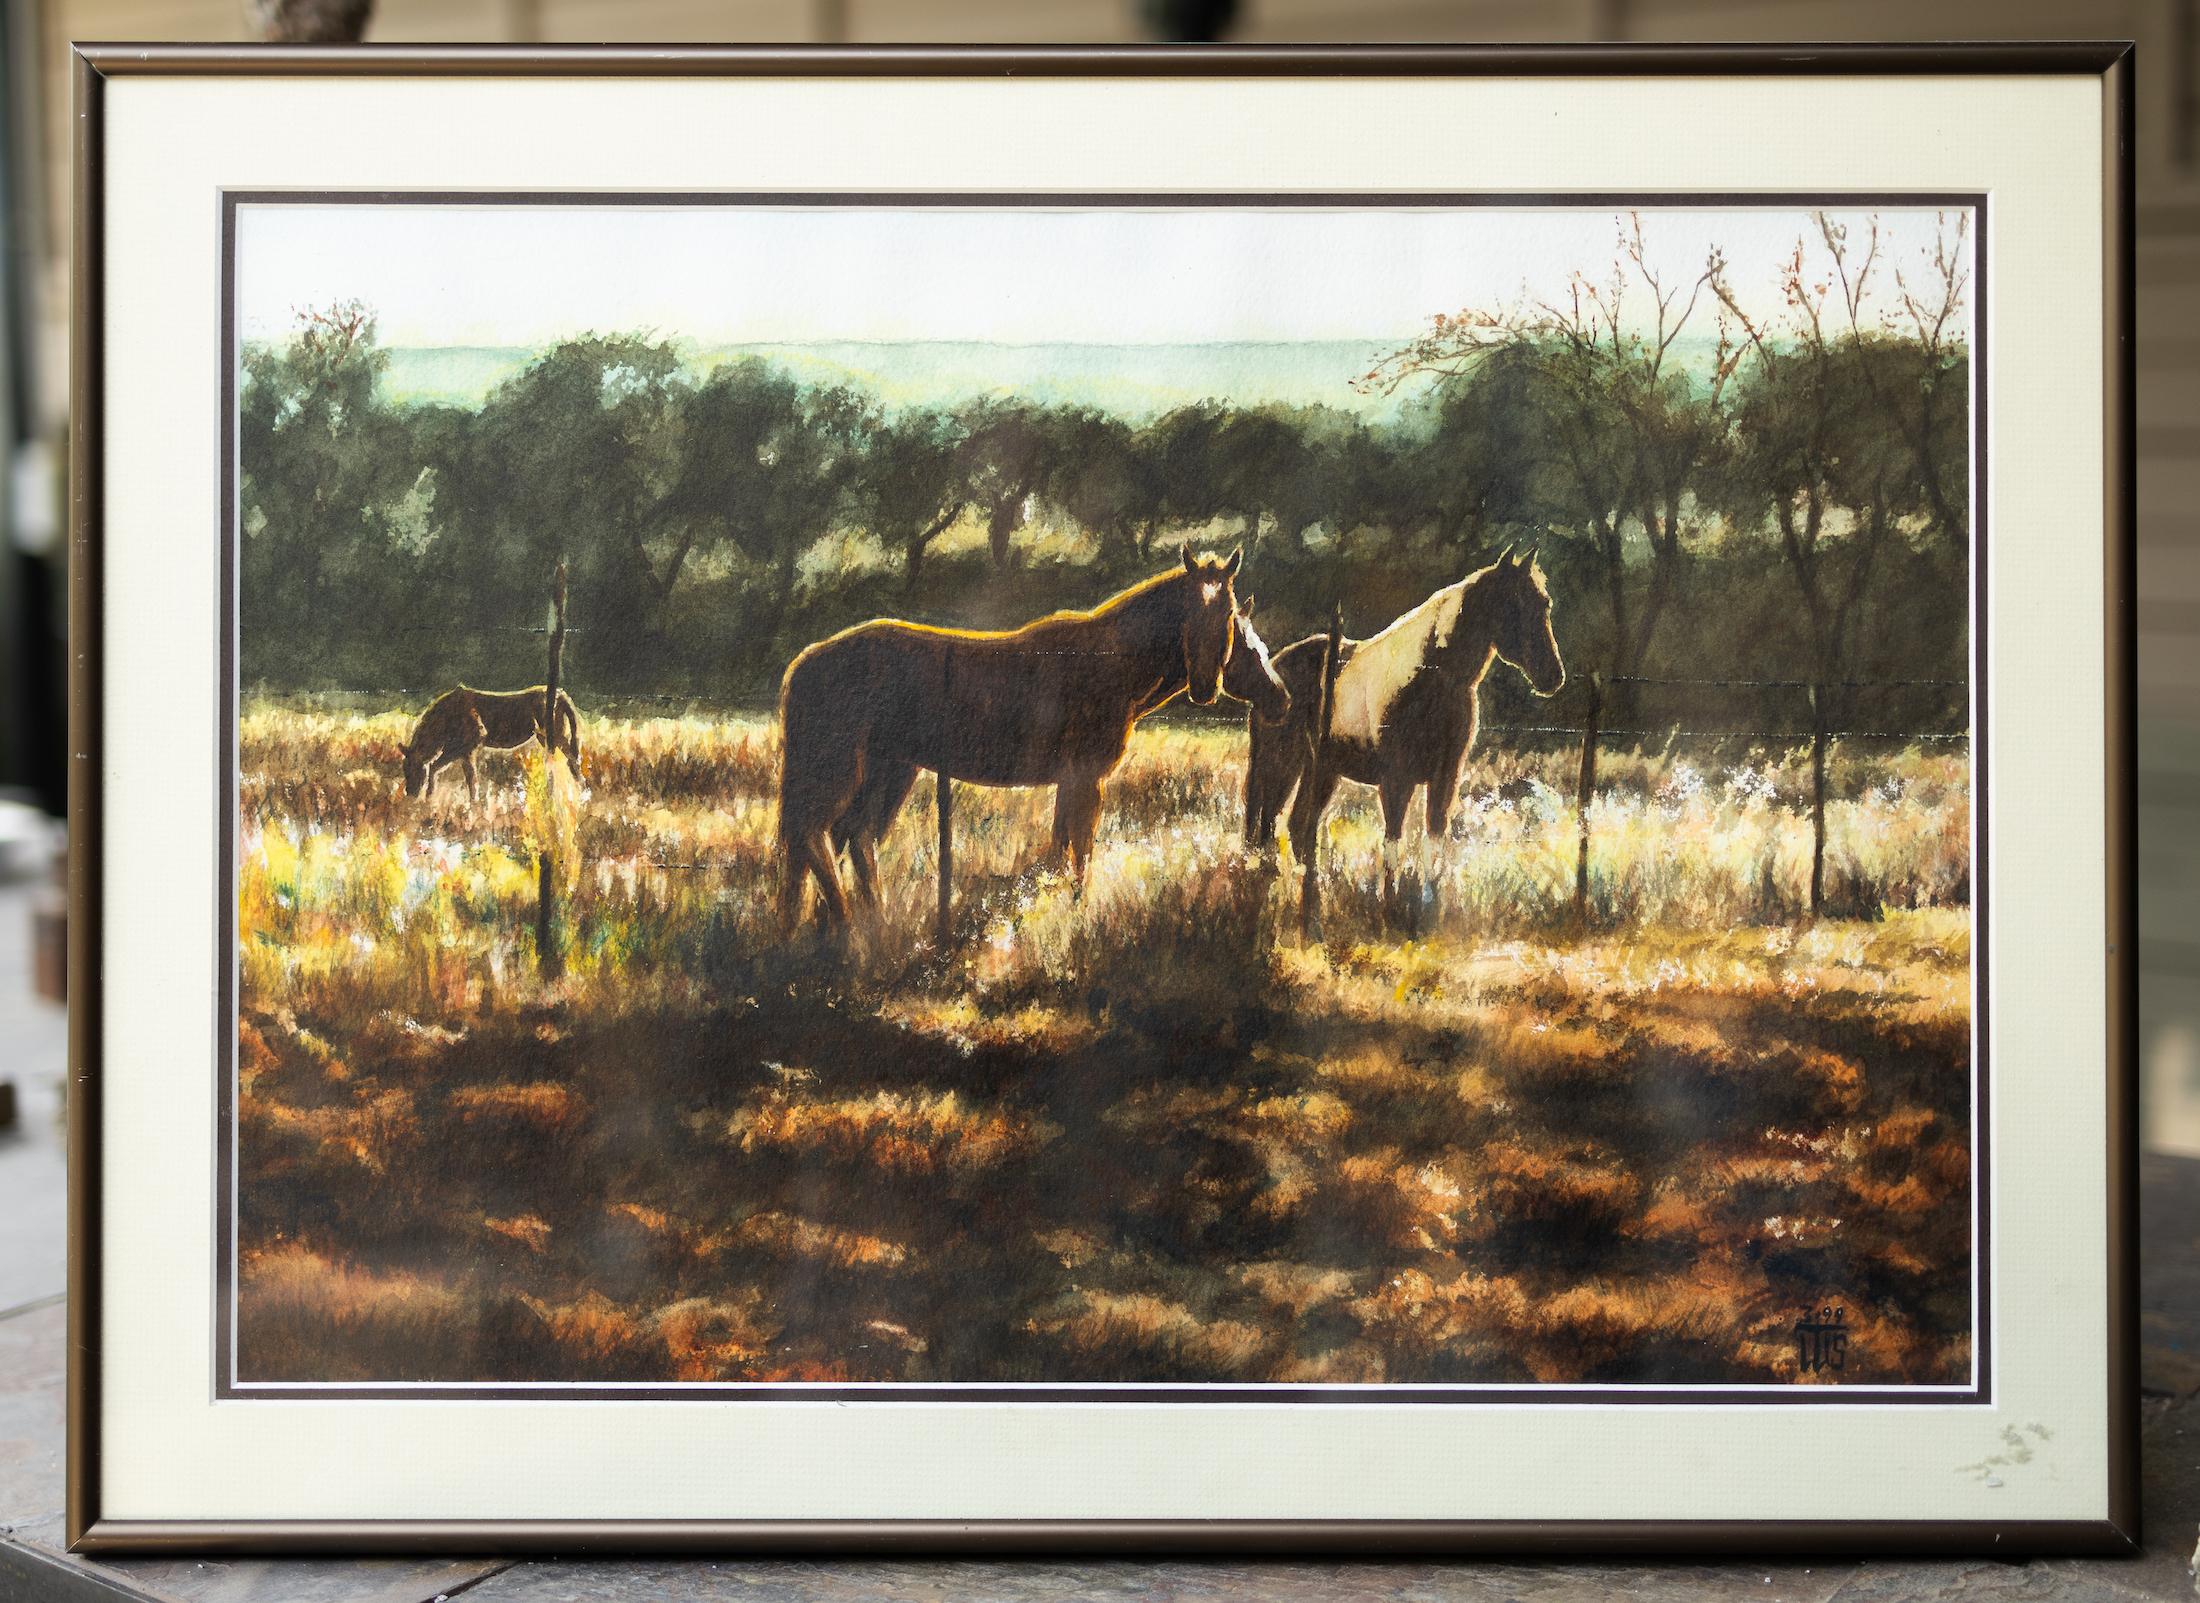 Horses in a Pasture - Art by Tom Shefelman